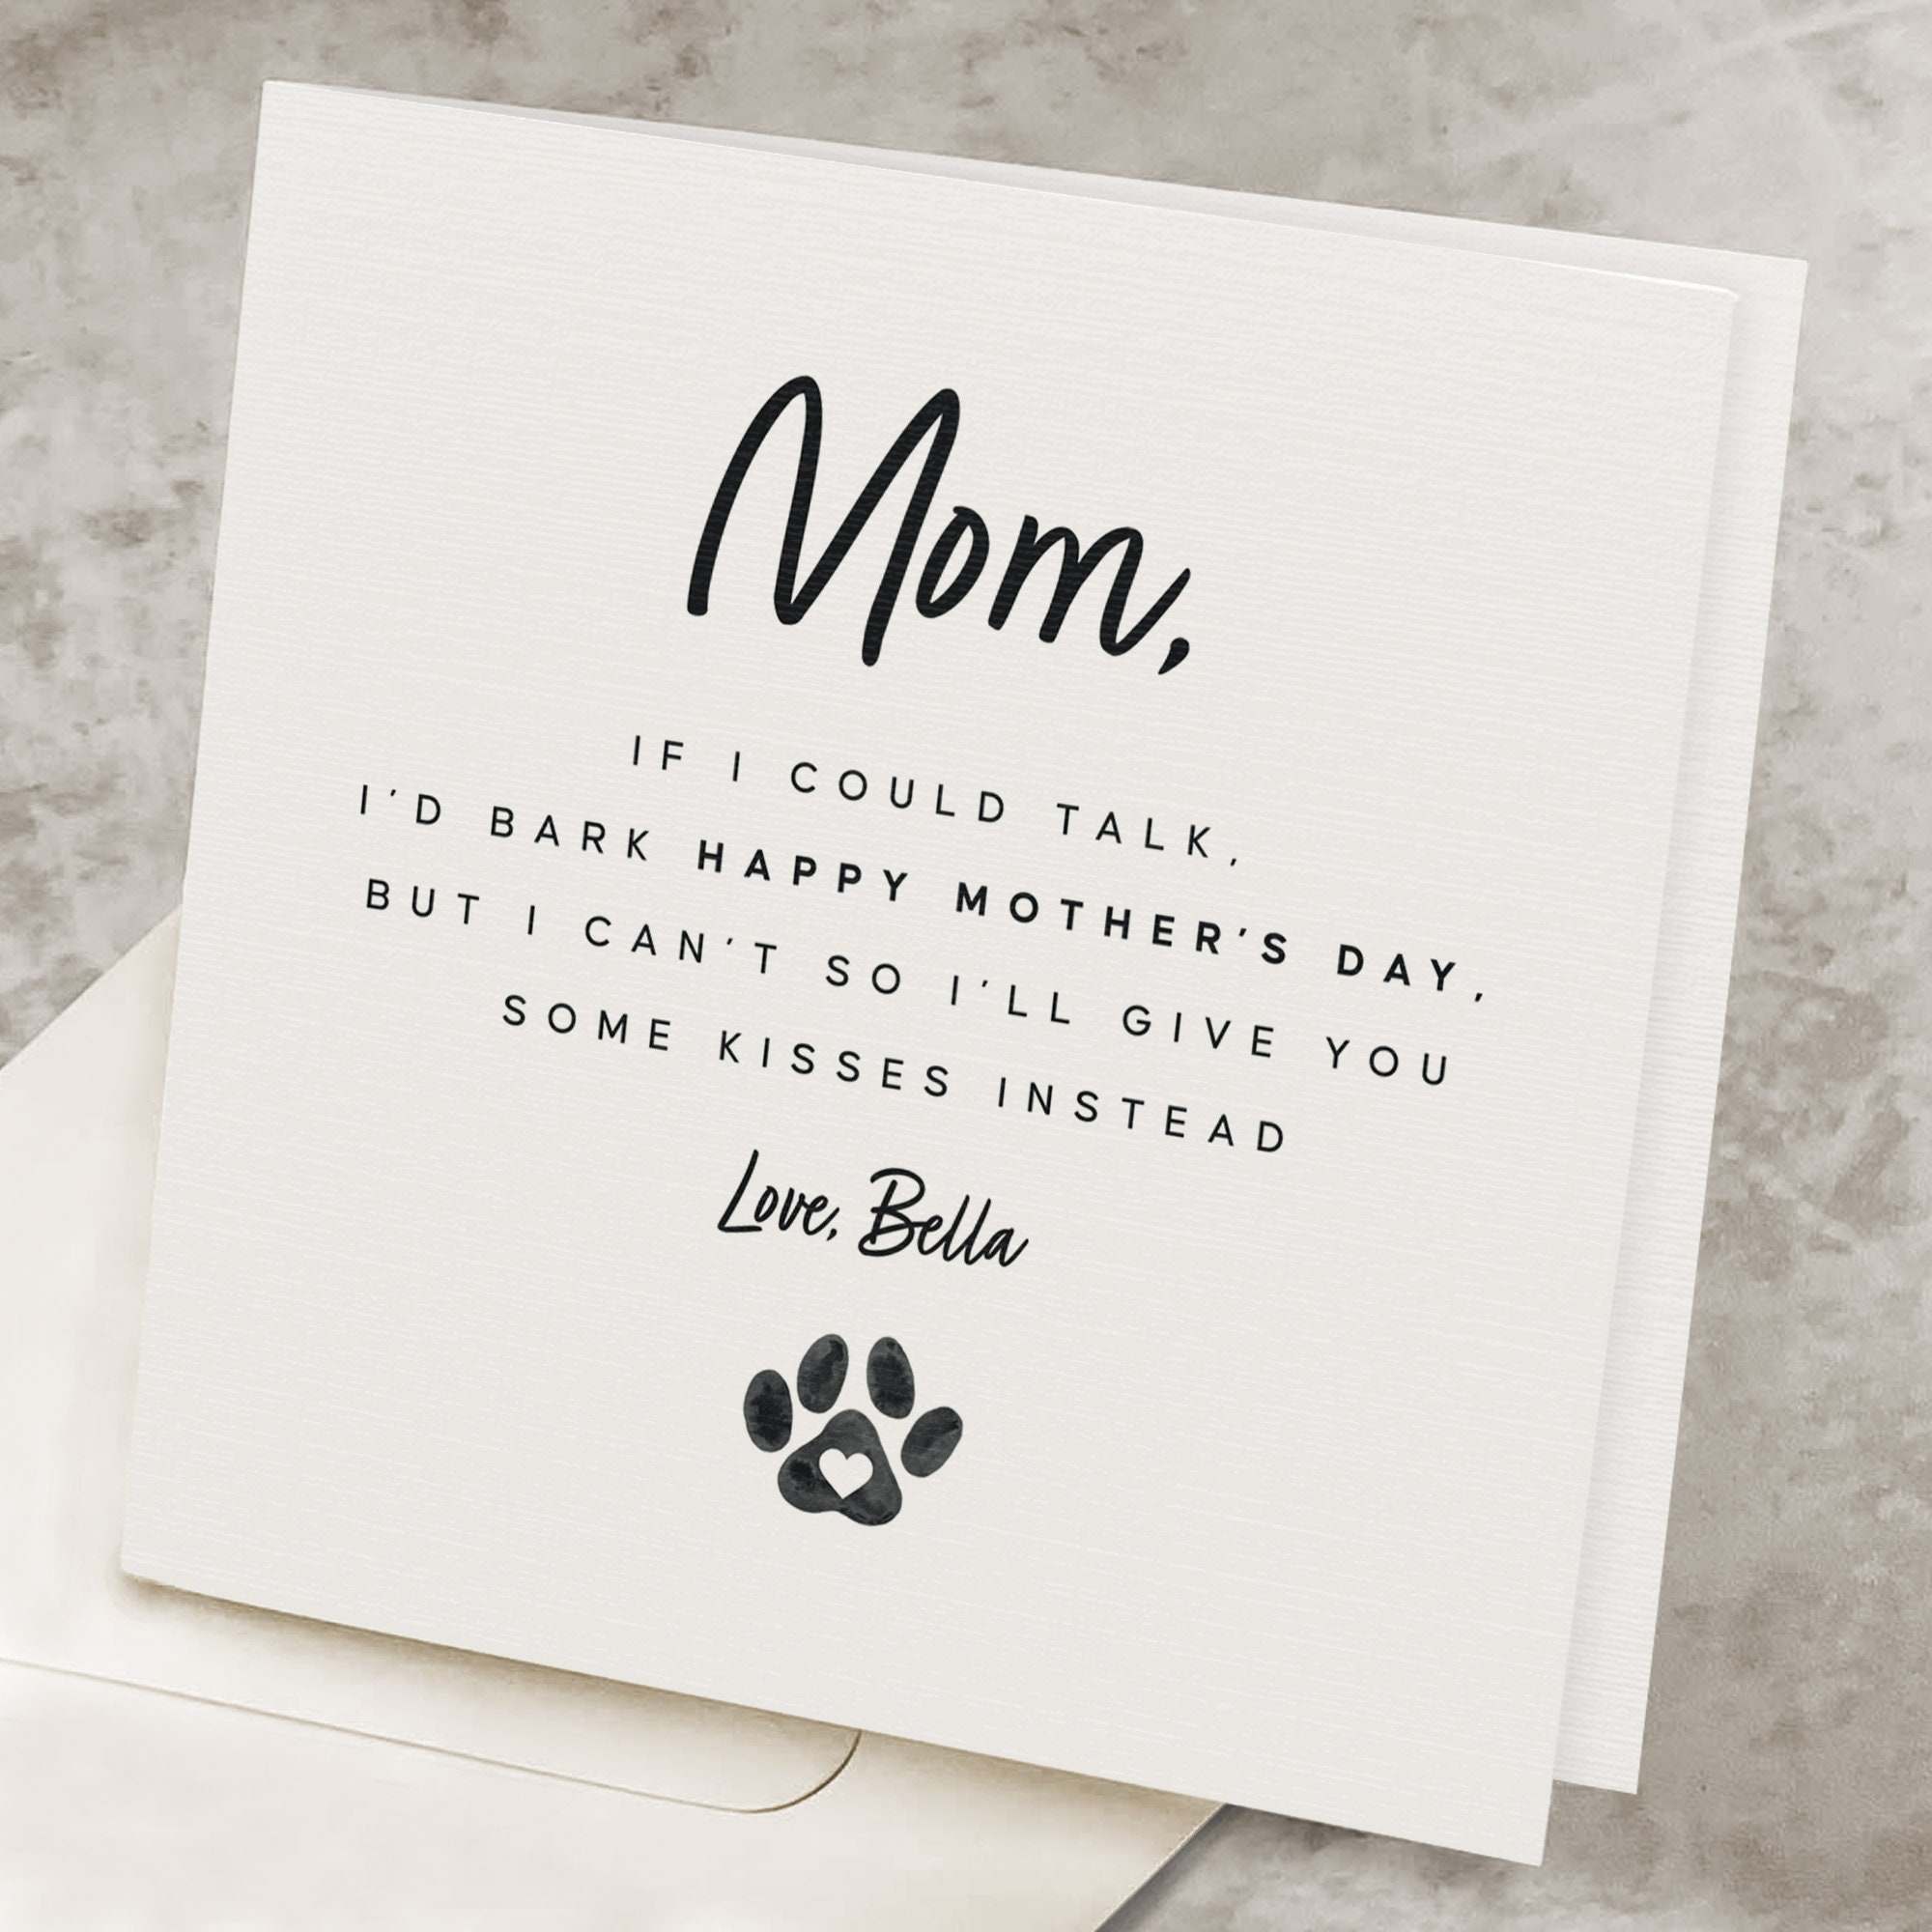 25 Gifts To Spoil Dog Moms On Mother's Day - BARK Post